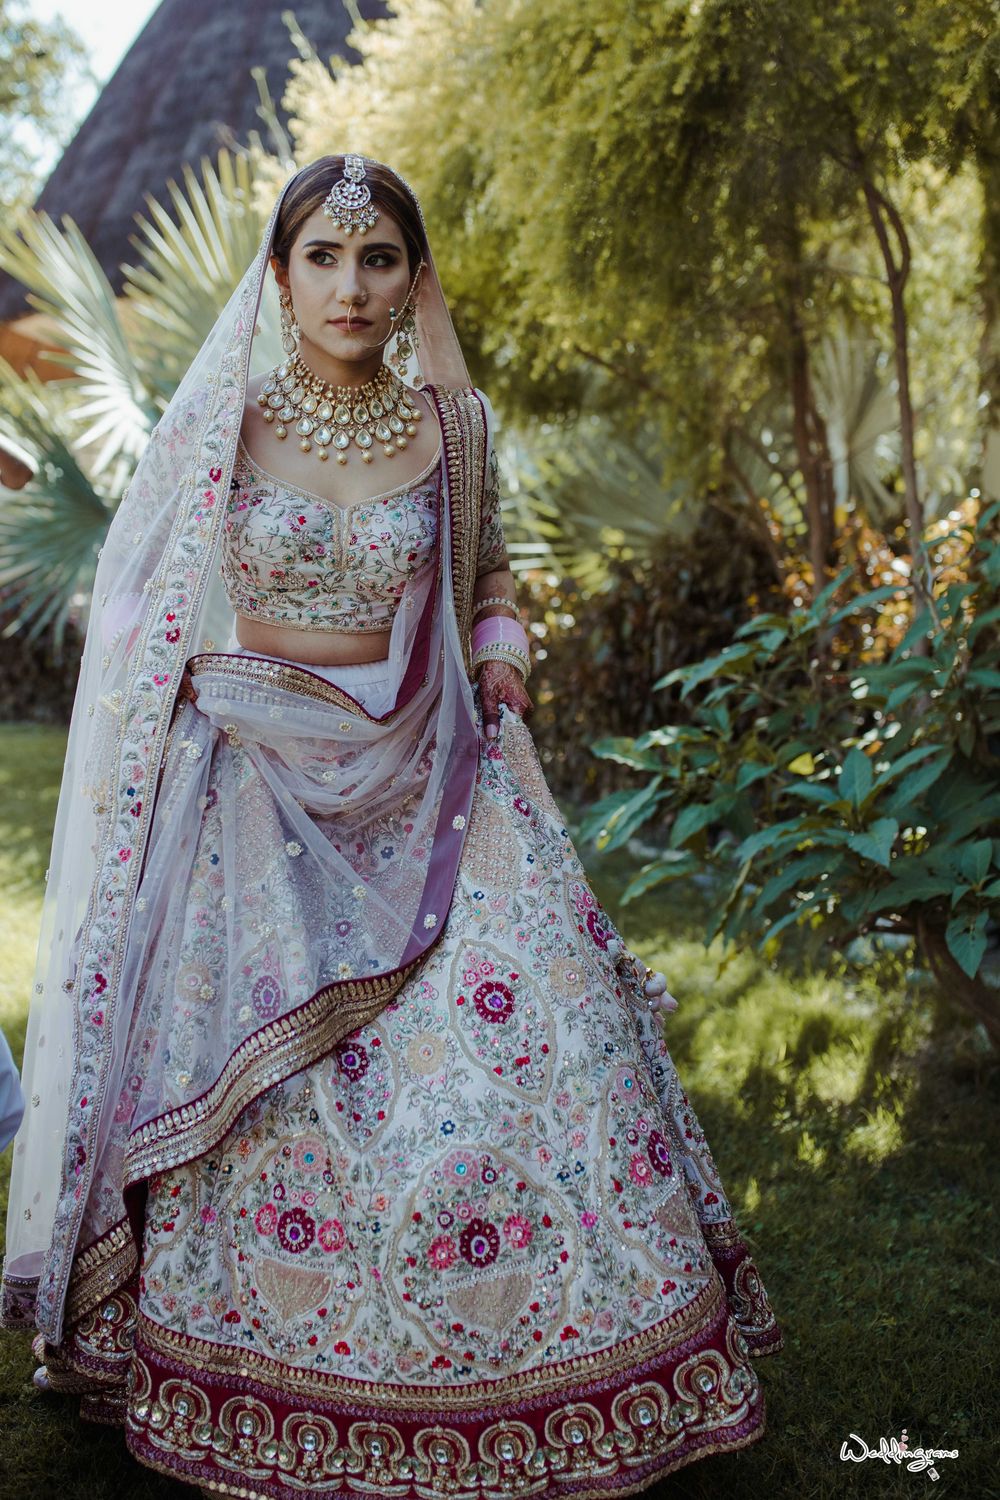 Photo of offbeat floral bridal lehenga in white and maroon